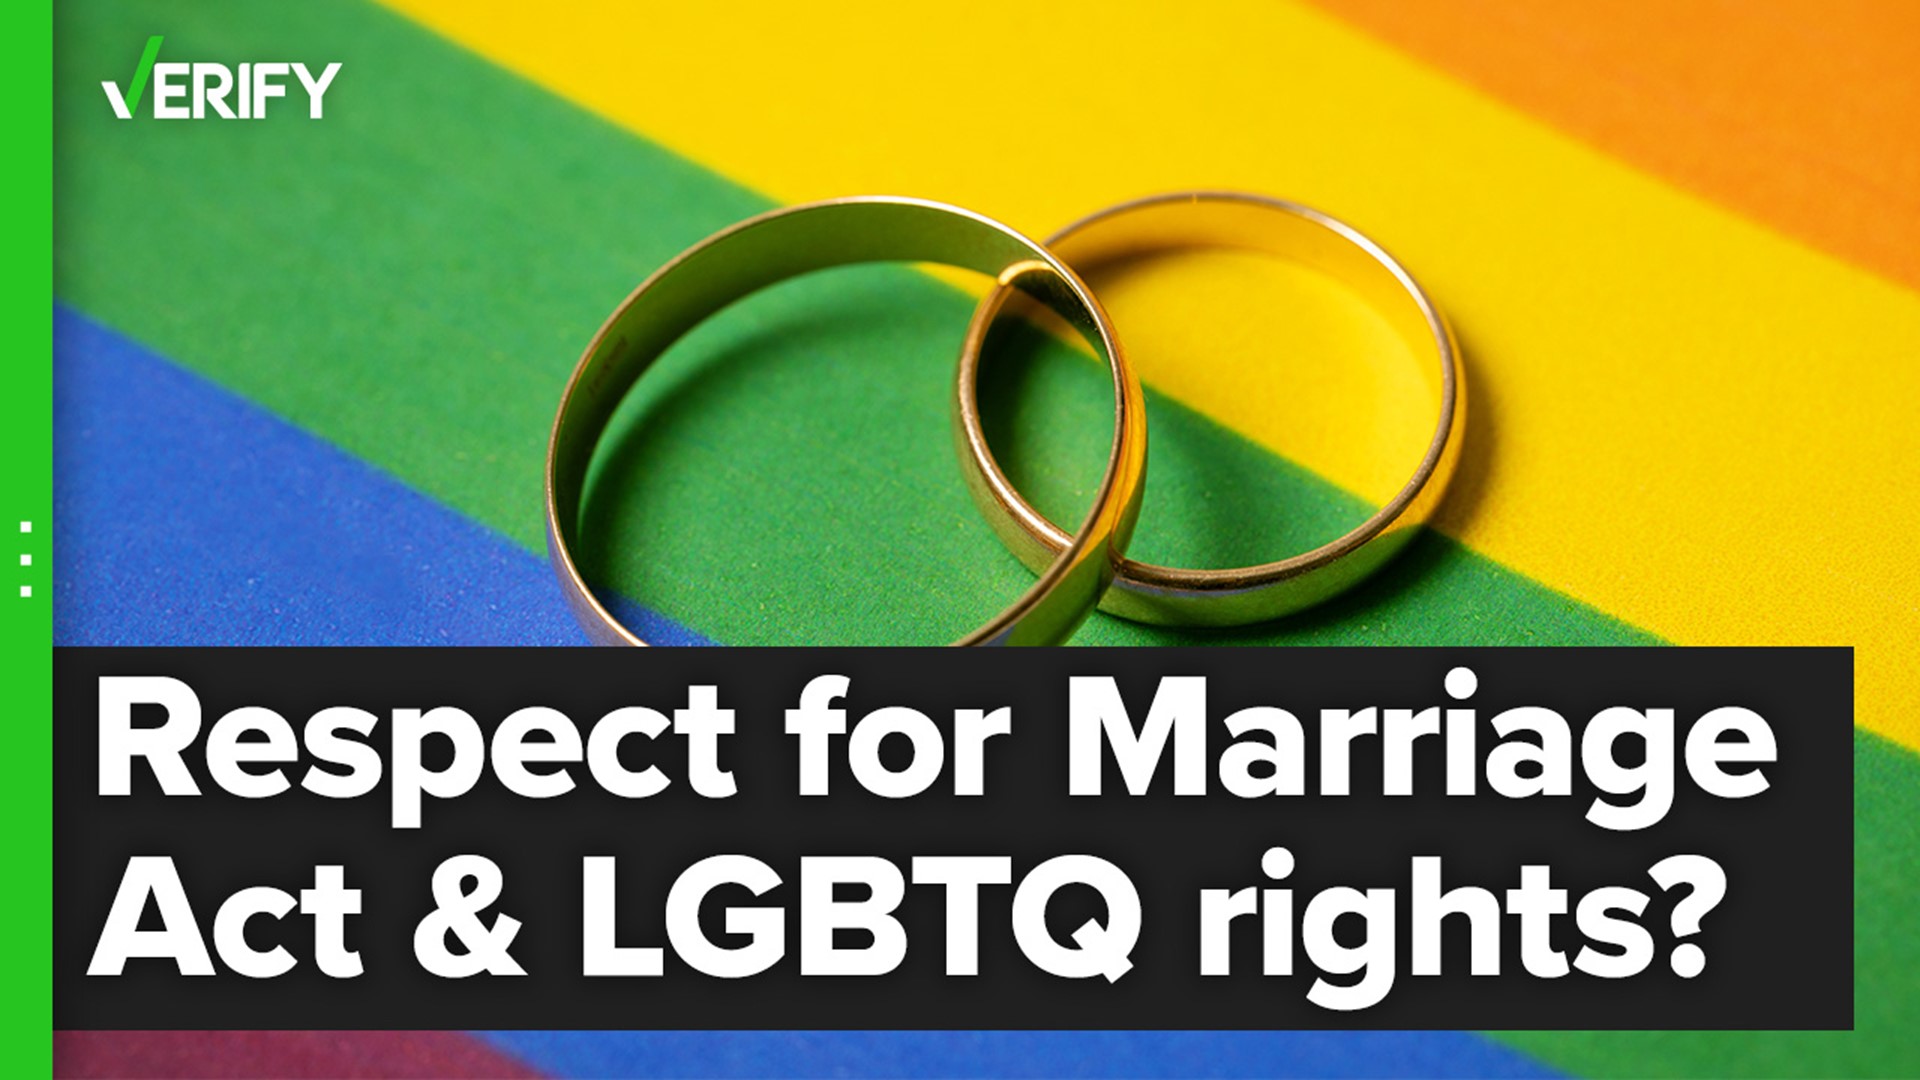 The Respect for Marriage Act ensures marriage is recognized federally, regardless of sex, race or ethnicity. Here is what the bill does and doesn’t do.